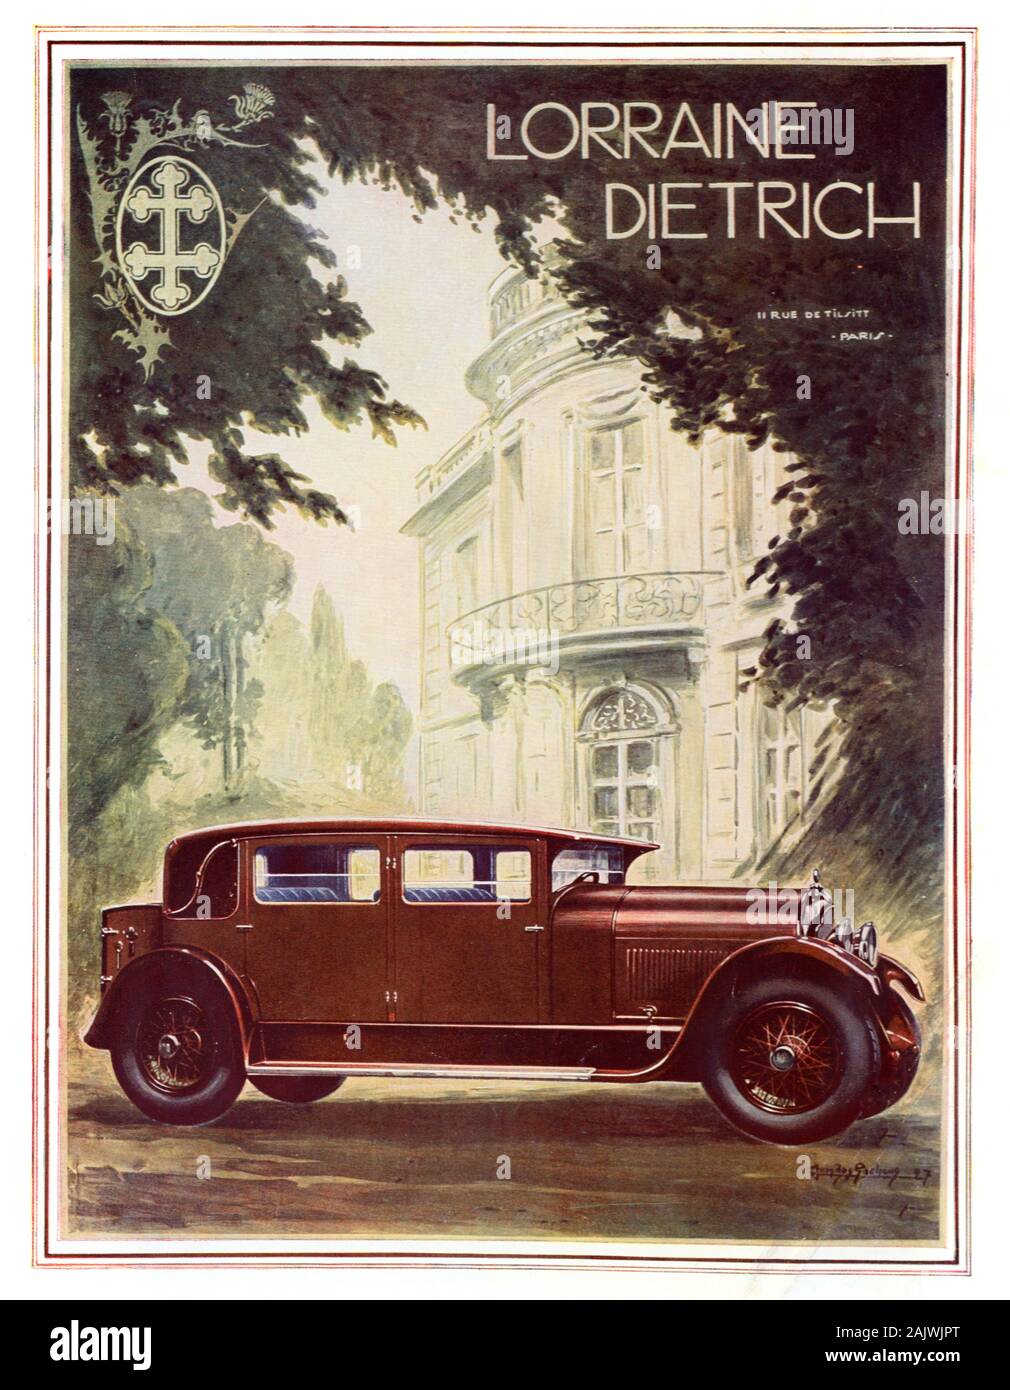 Old Advert, Vintage Advert, Advertisement or Publicity for French Luxury Car Lorraine-Dietrich Outside the Villa Rothschild Mansion (built in 1881) in Cannes Côte-d'Azur or French Riviera France. Advert 1927 Stock Photo